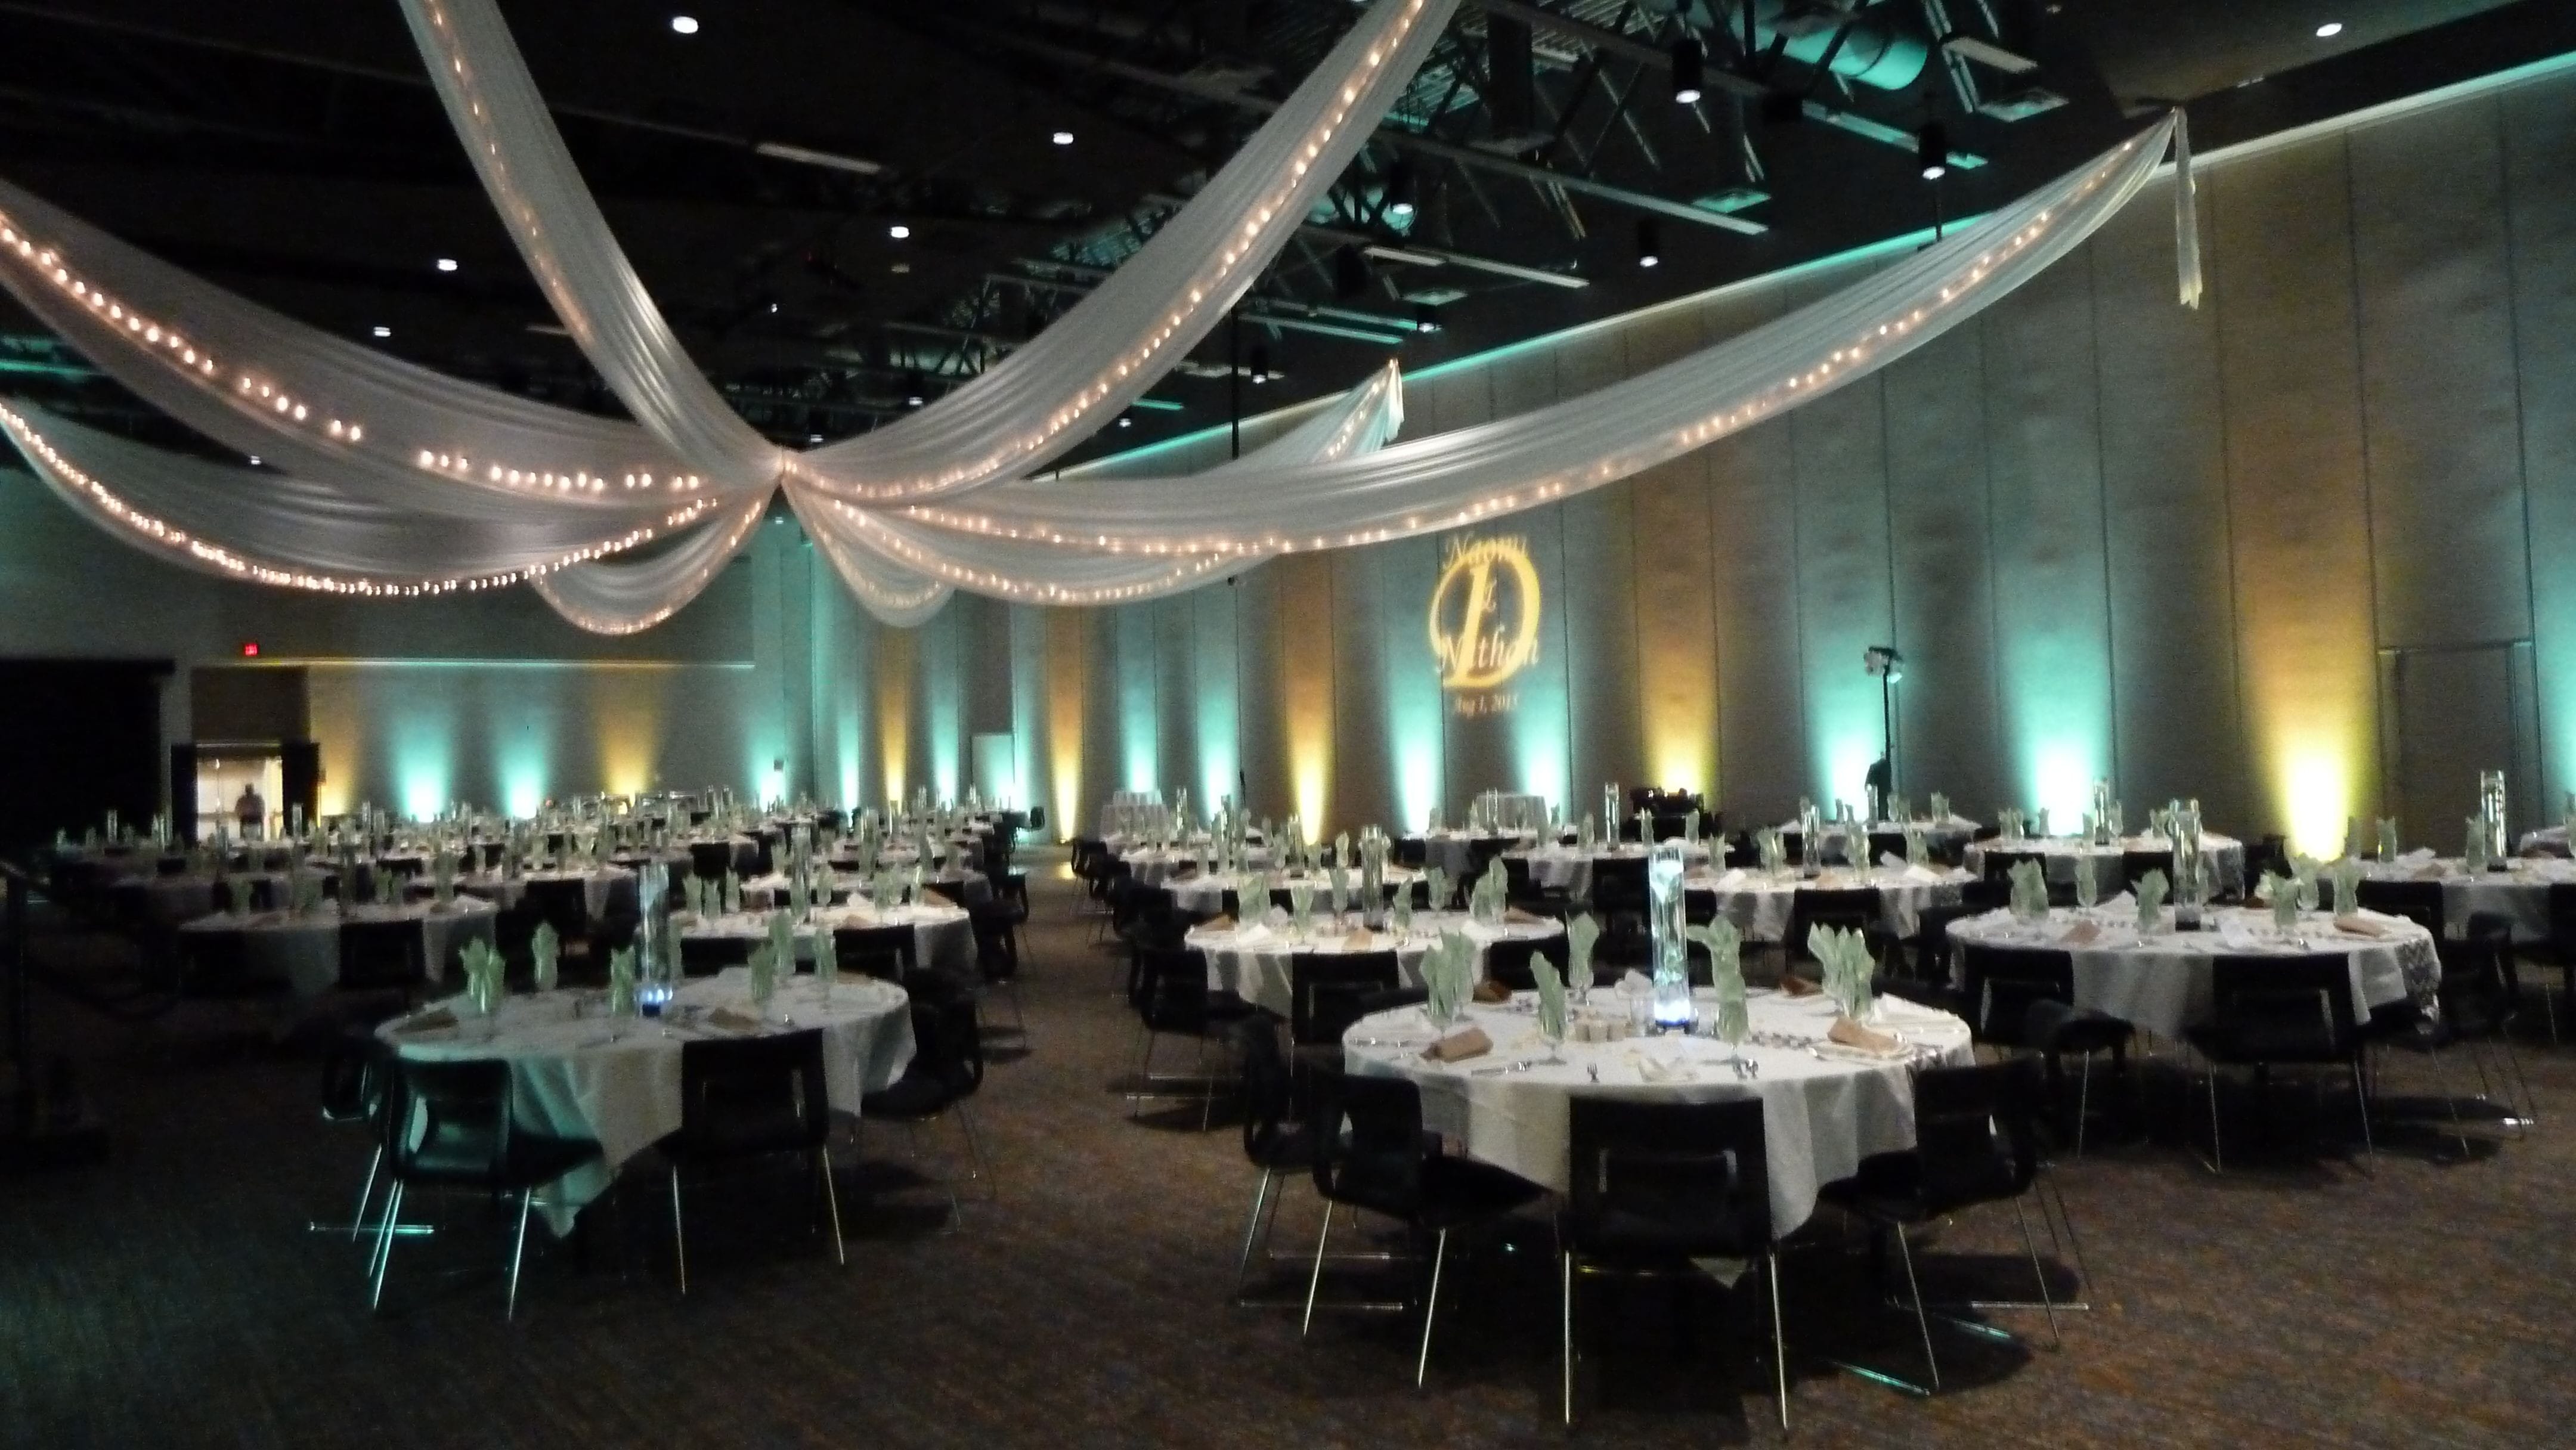 Up lighting in mint green and yellow with a wedding monogram by Duluth Event Lighting. Ceiling by @thevaultduluth